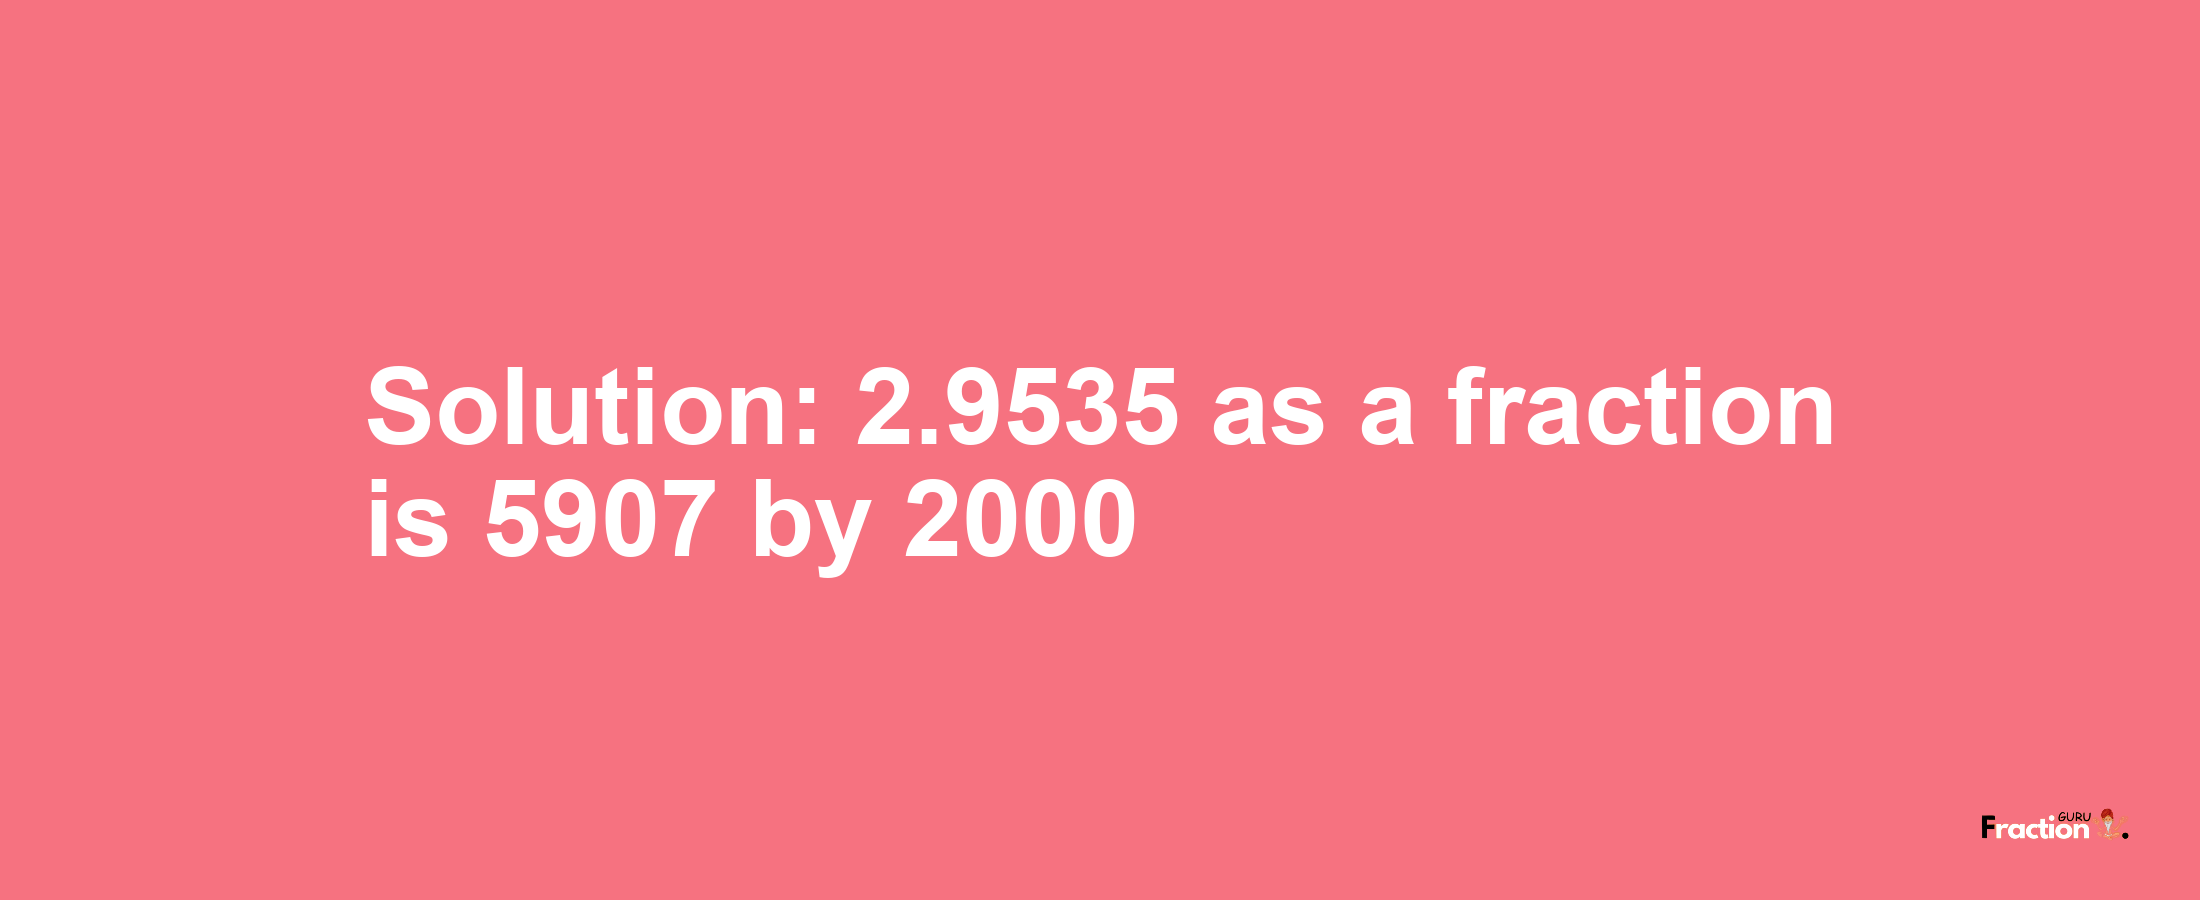 Solution:2.9535 as a fraction is 5907/2000